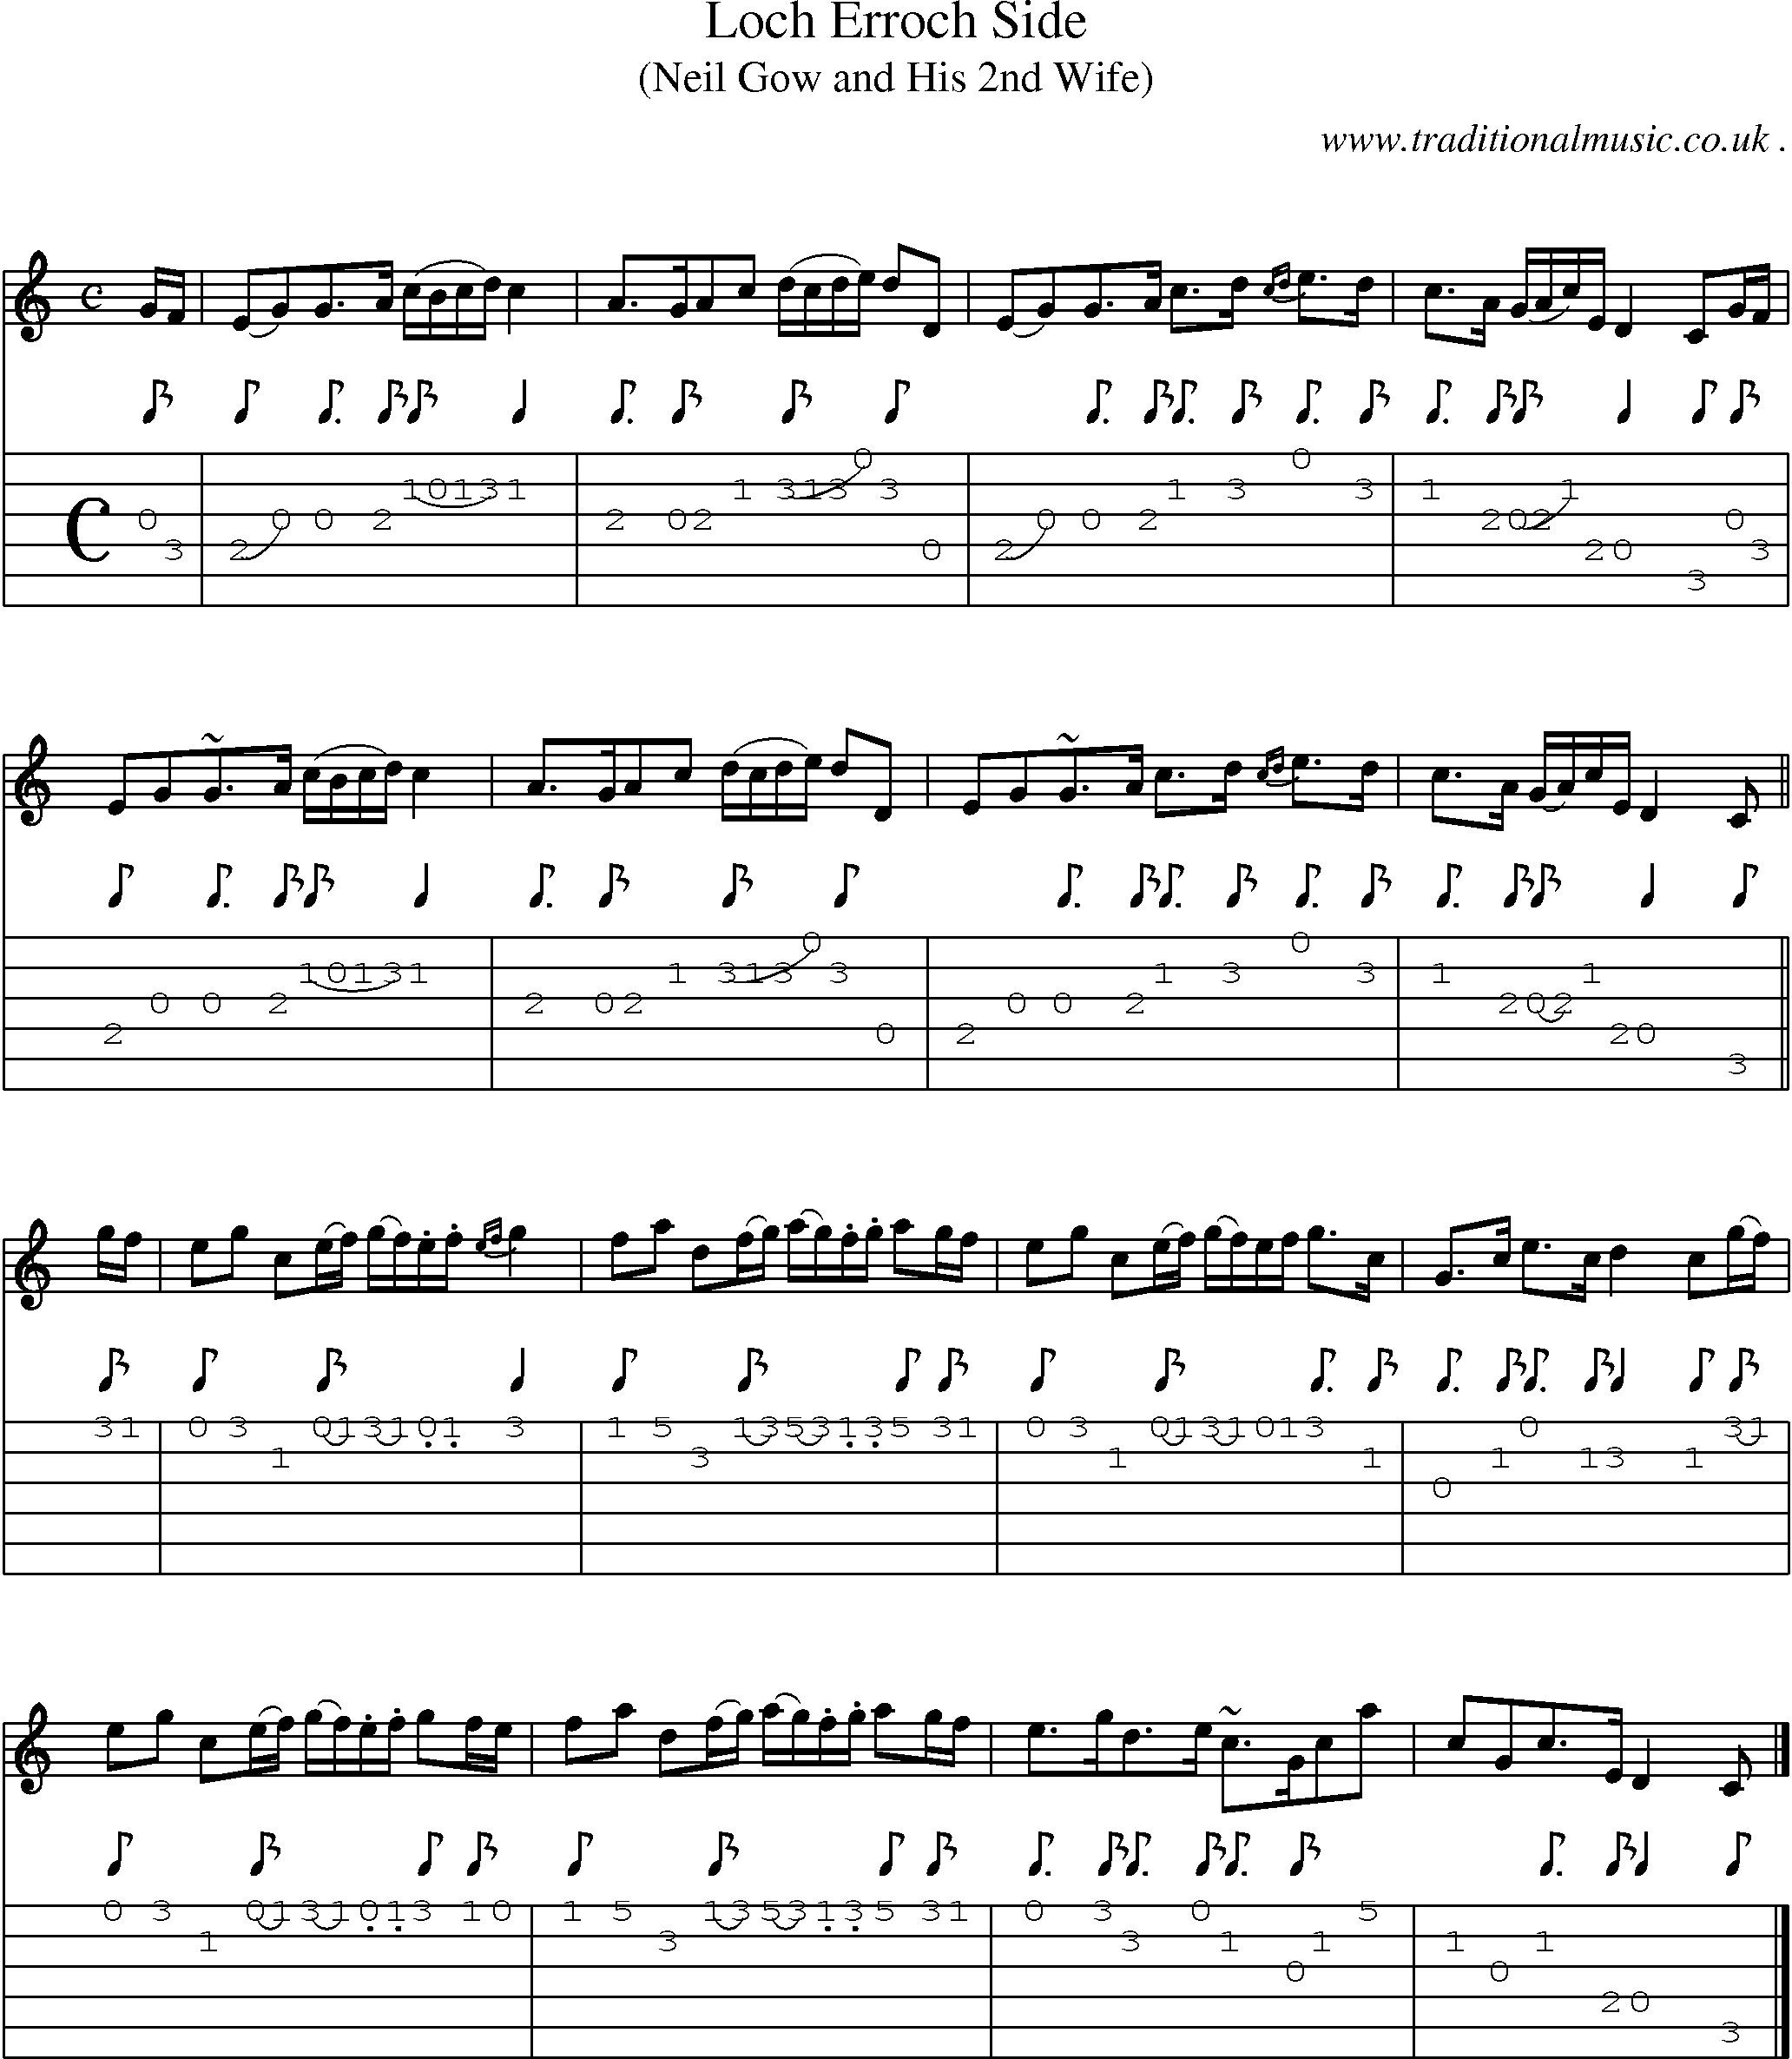 Sheet-music  score, Chords and Guitar Tabs for Loch Erroch Side